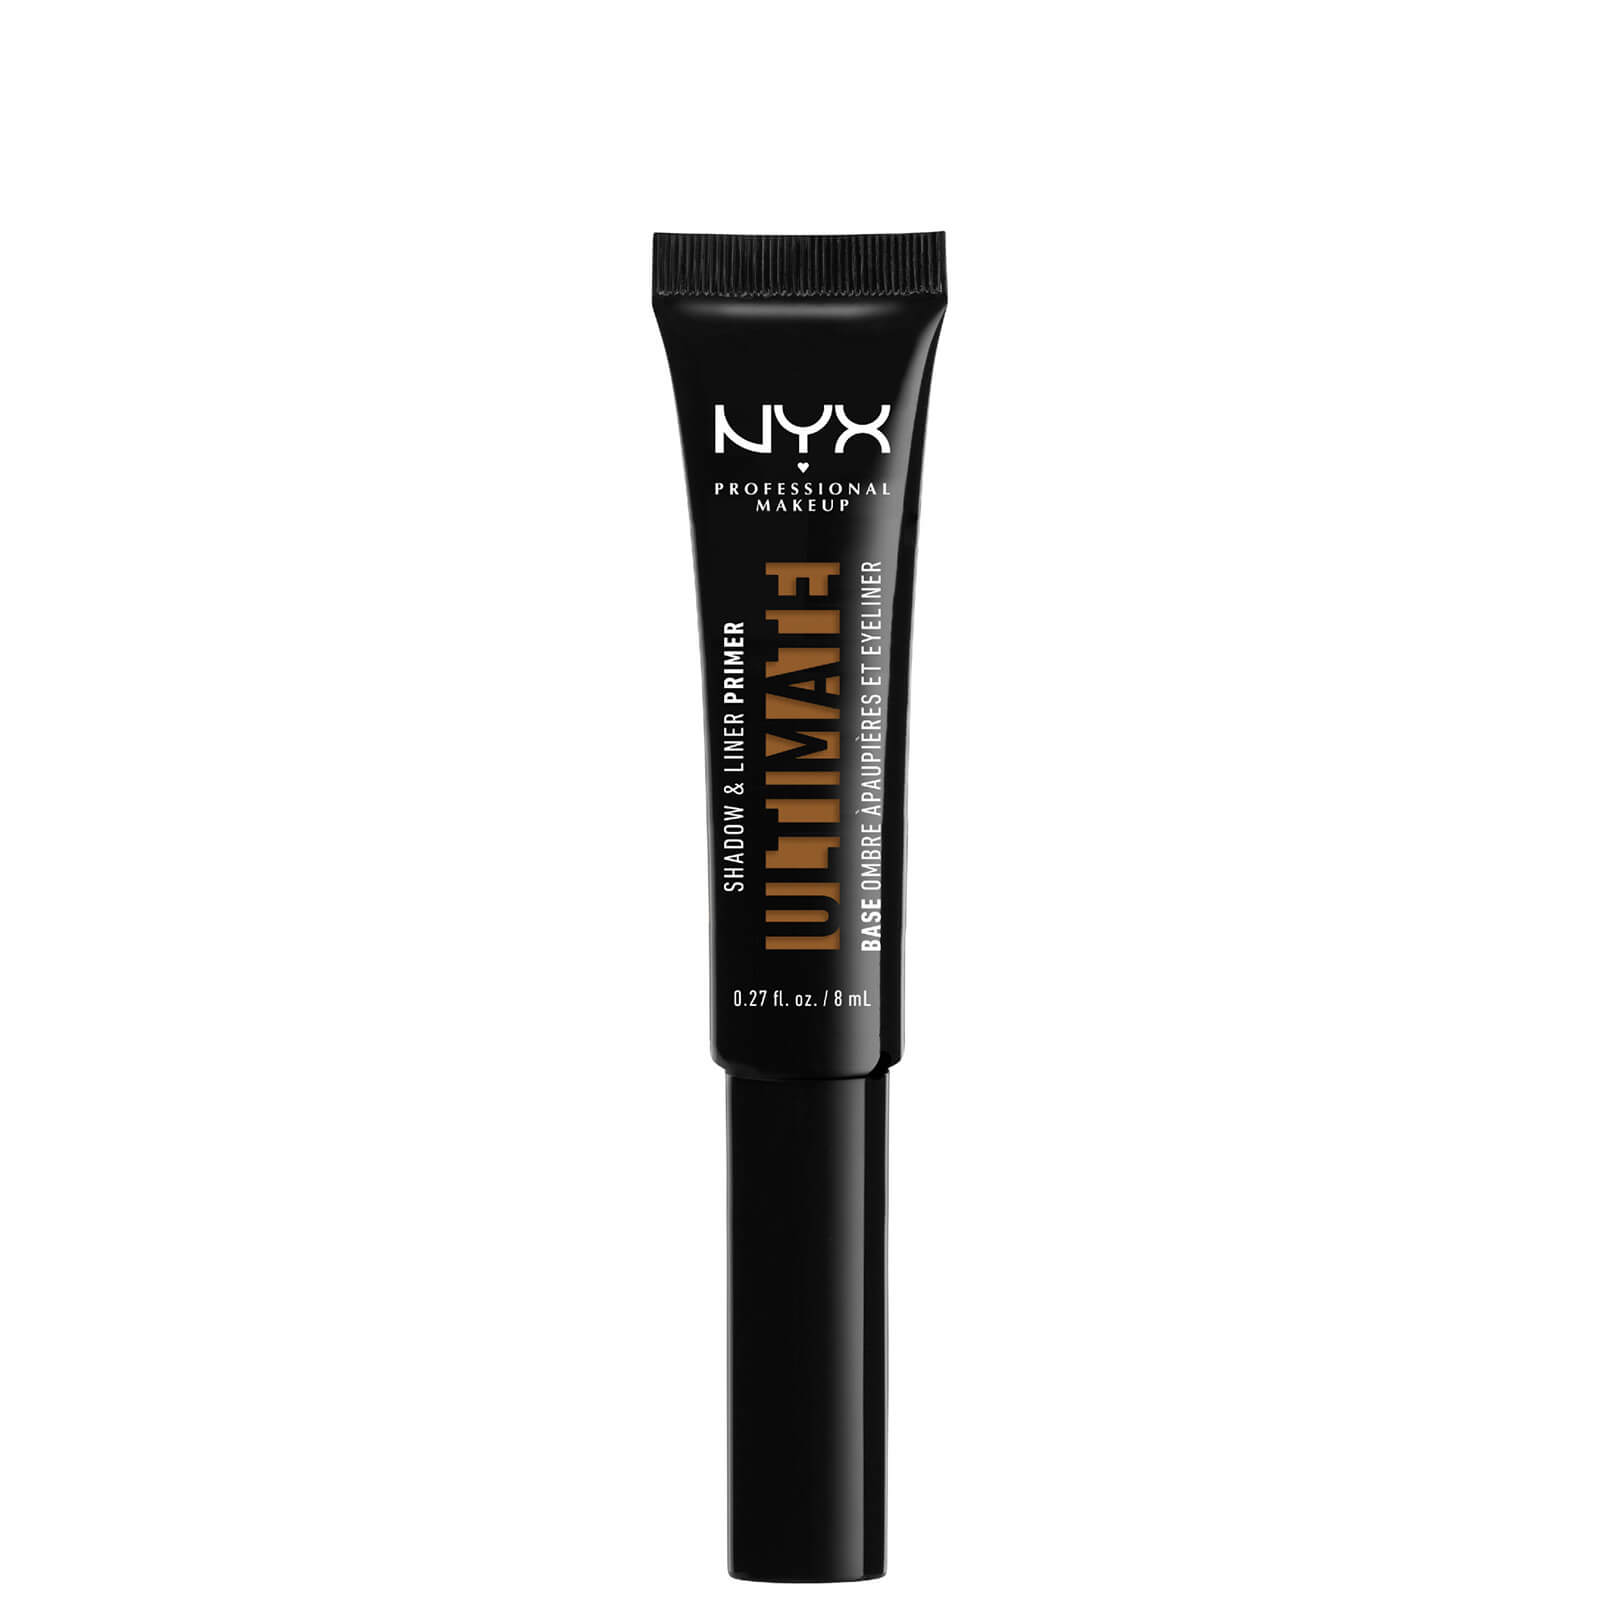 NYX Professional Makeup Vitamin E Infused Ultimate Shadow and Liner Primer (Various Shades) - 04 Deep